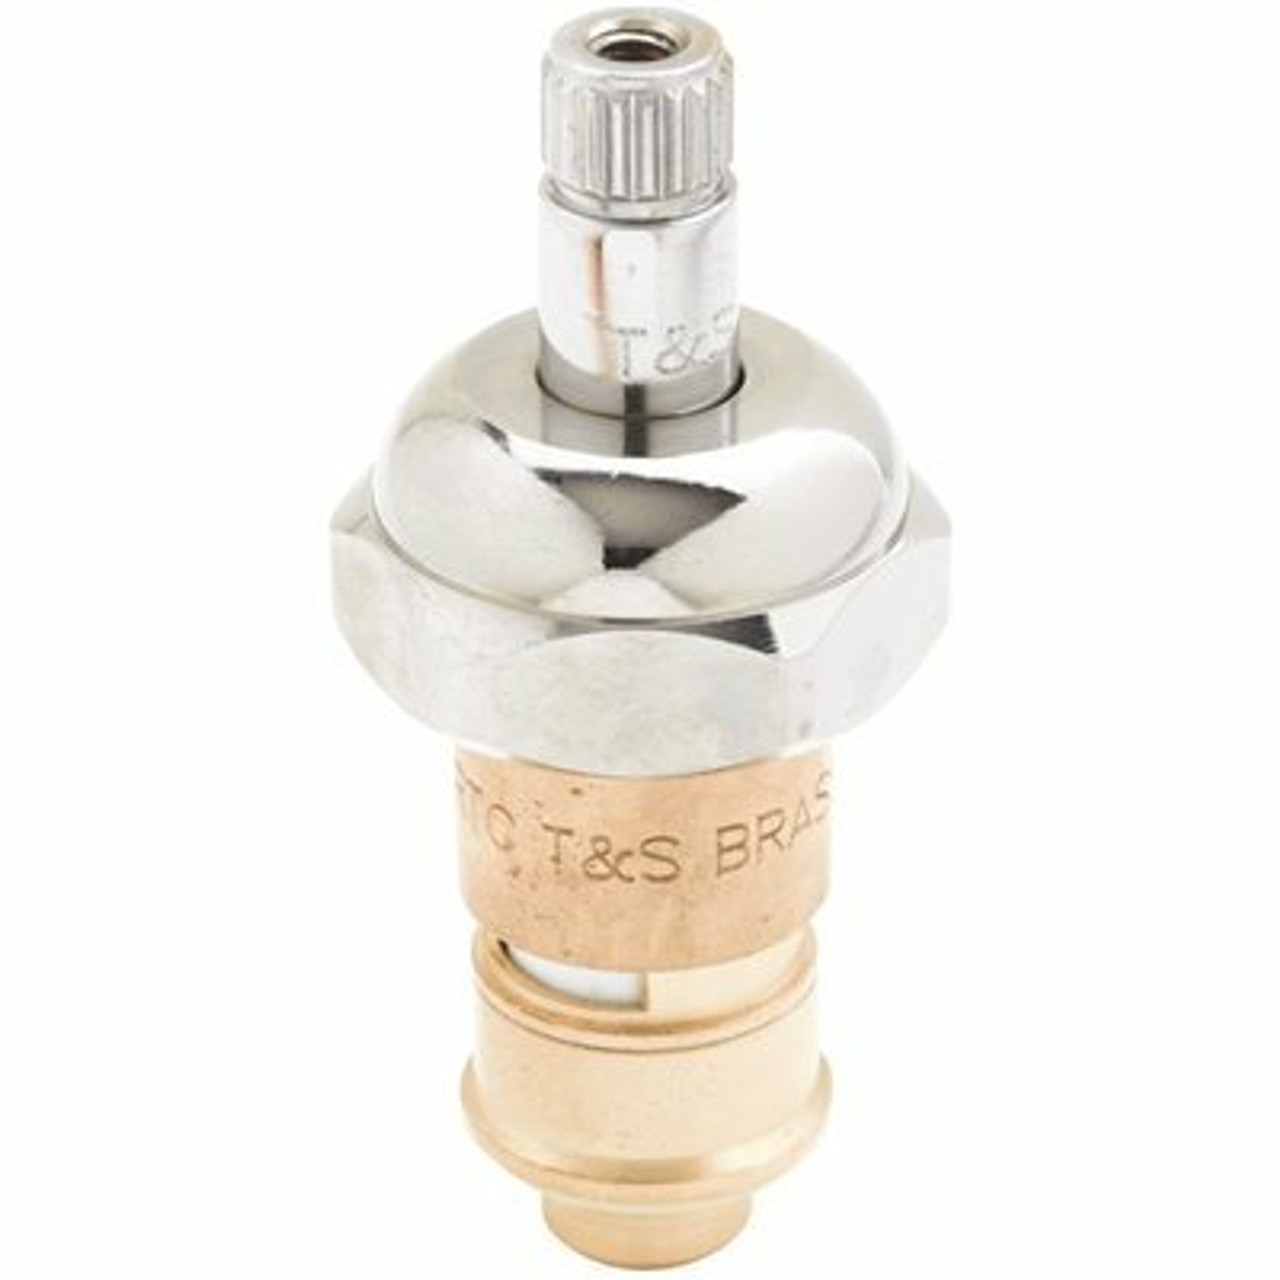 T&S Ceramic (Rtc) Hot Side Cartridge With Bonnet